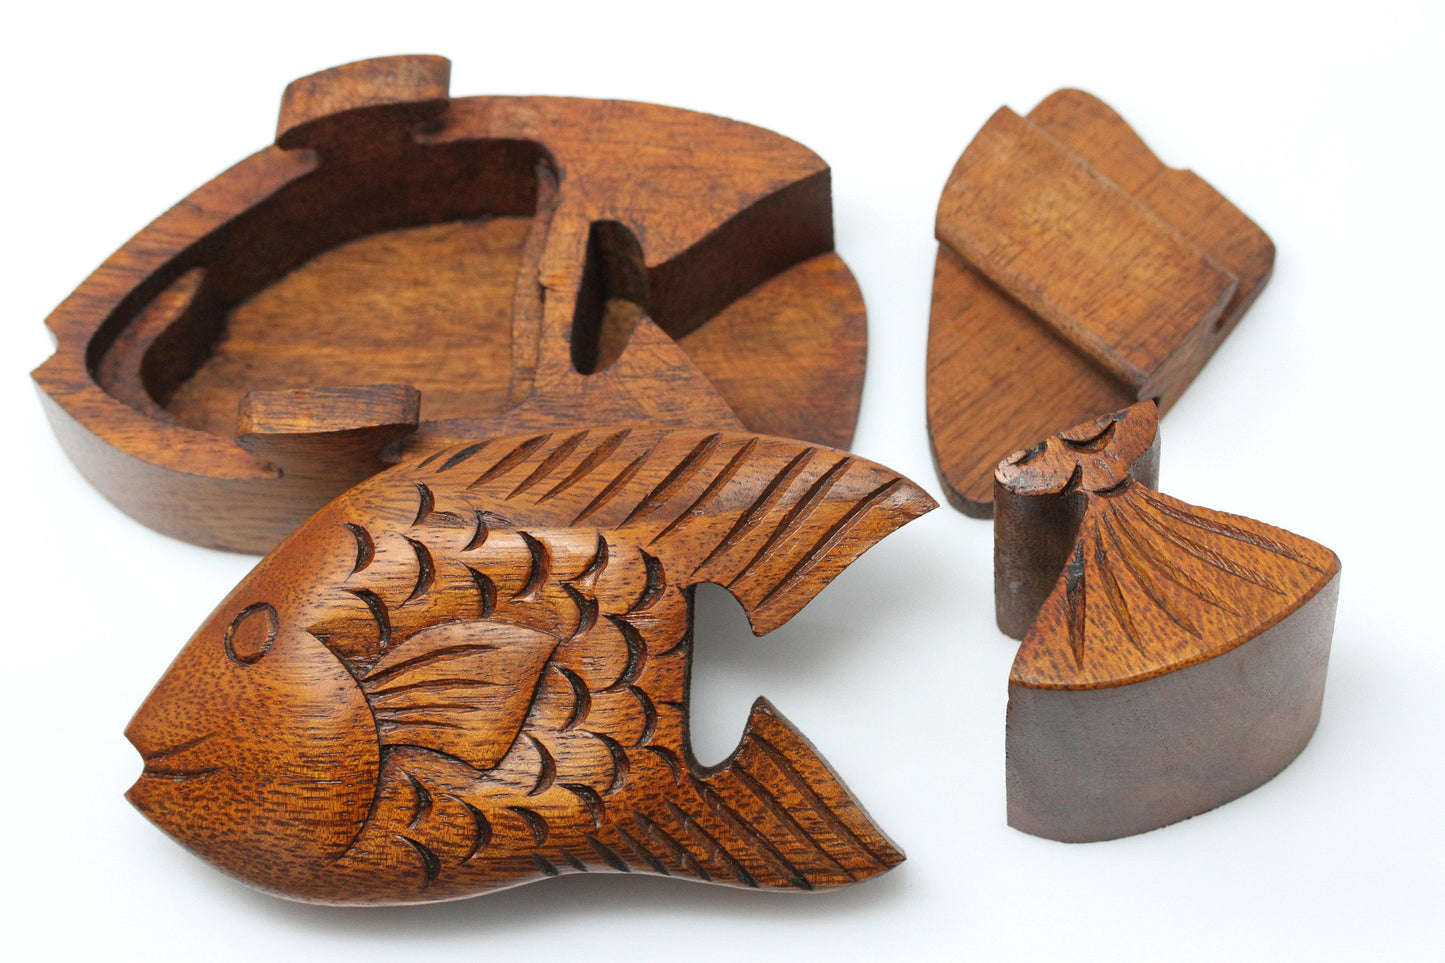 Fish secret puzzle box - hand carved wooden box